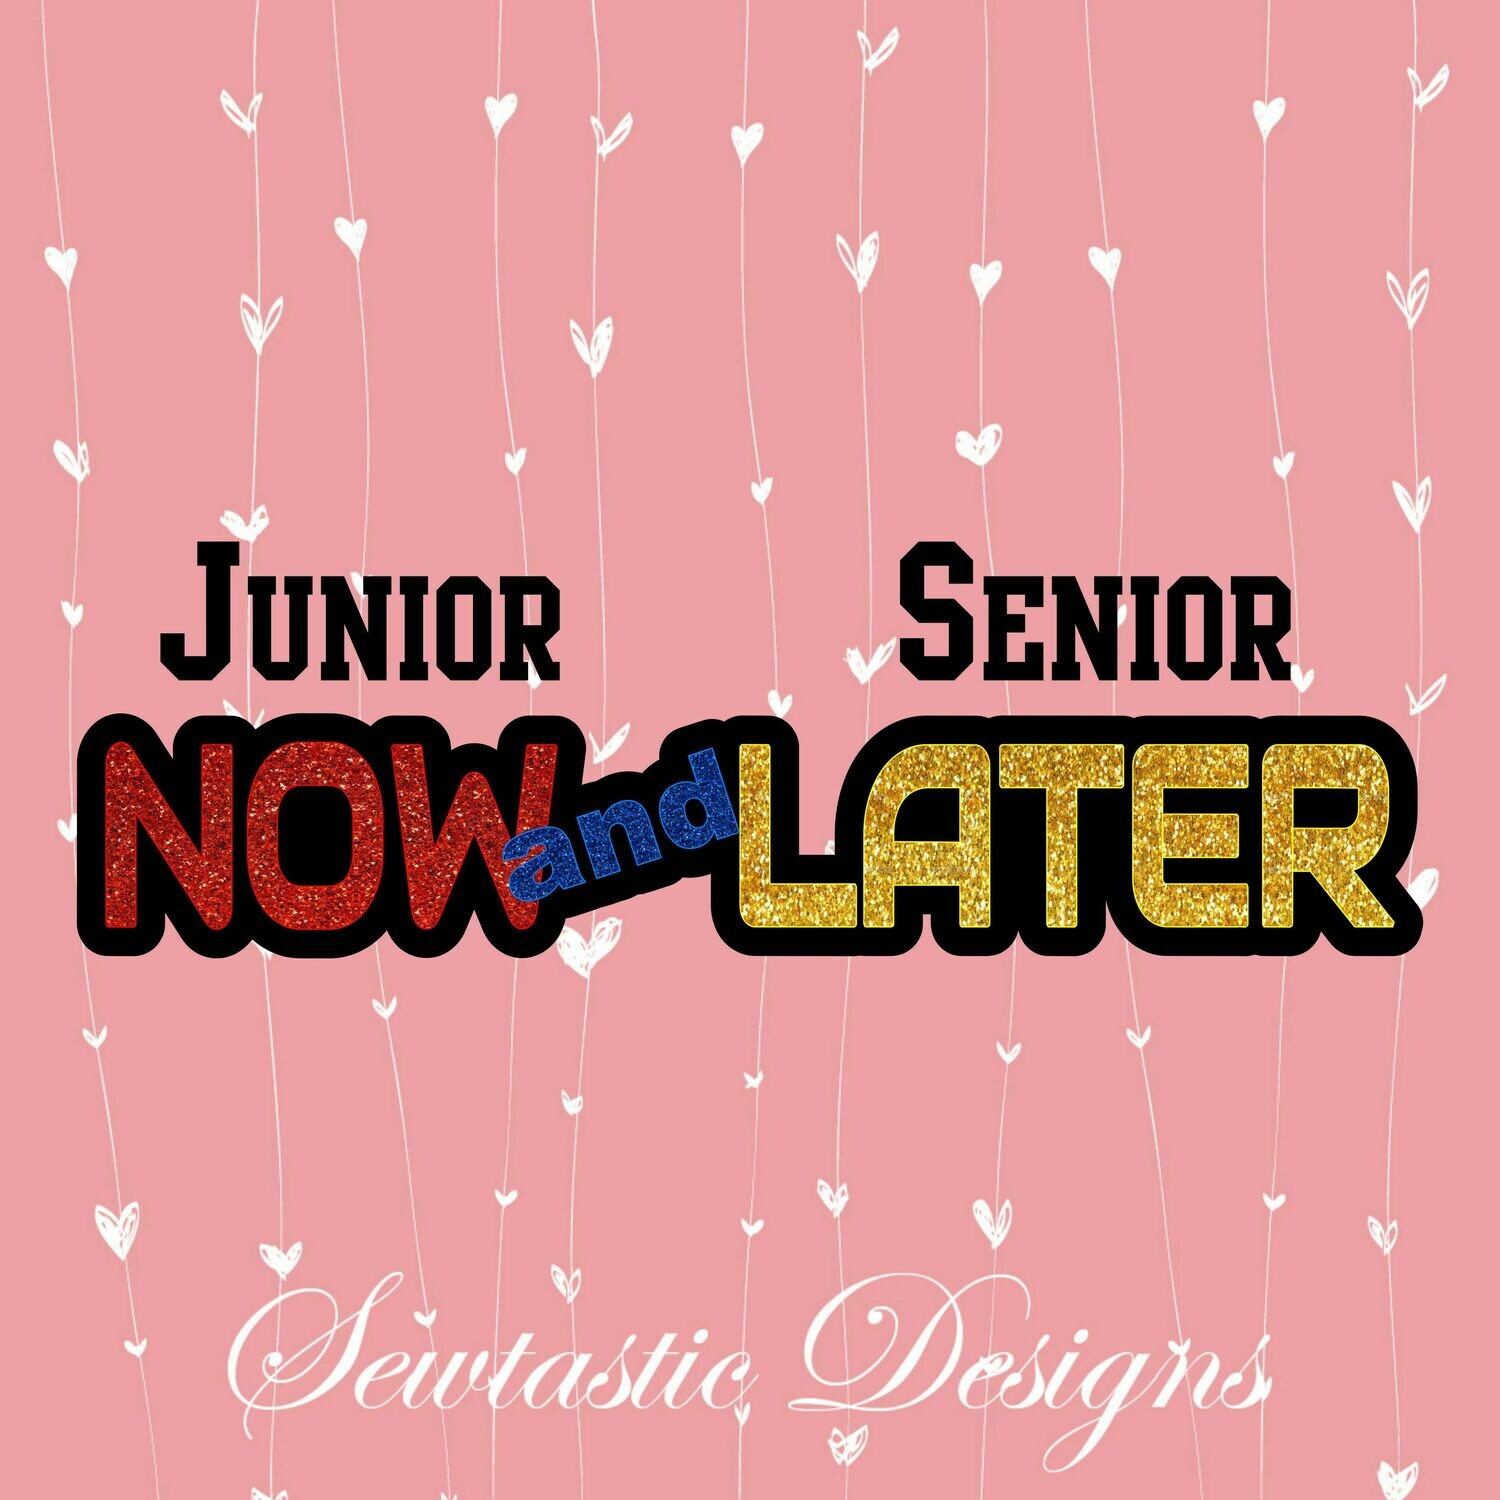 Junior Now Senior Later SVG, Junior Now SVG, Senior Later SVG, Junior SVG, Senior SVG, Cut File, Iron On, Decal, Cricut, Silhouette, ScanNCut &amp; Many More